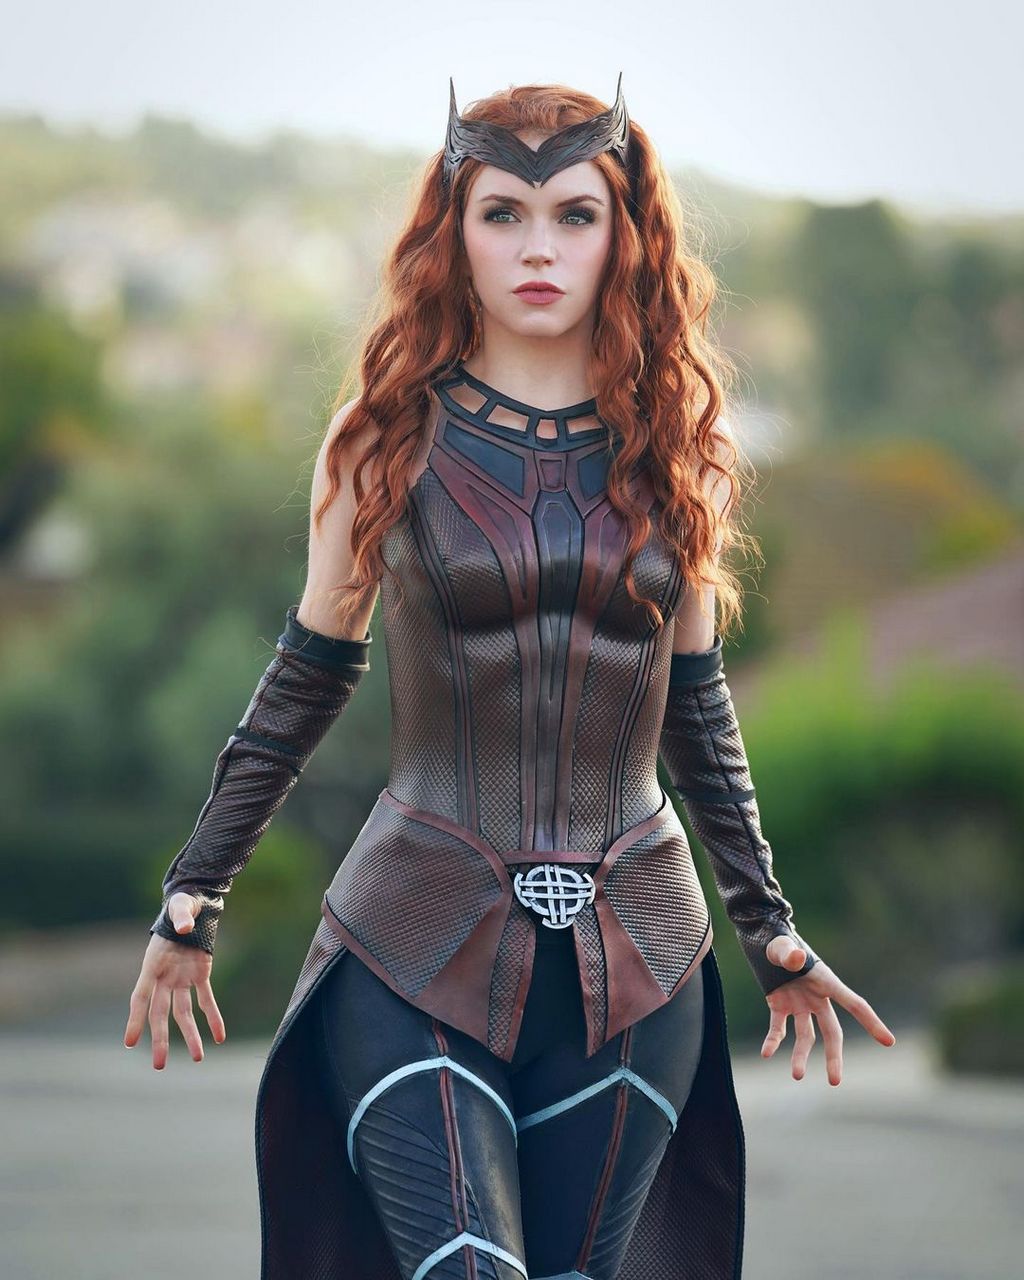 Kirstin From Armoredheartcosplay Scarlet Witch